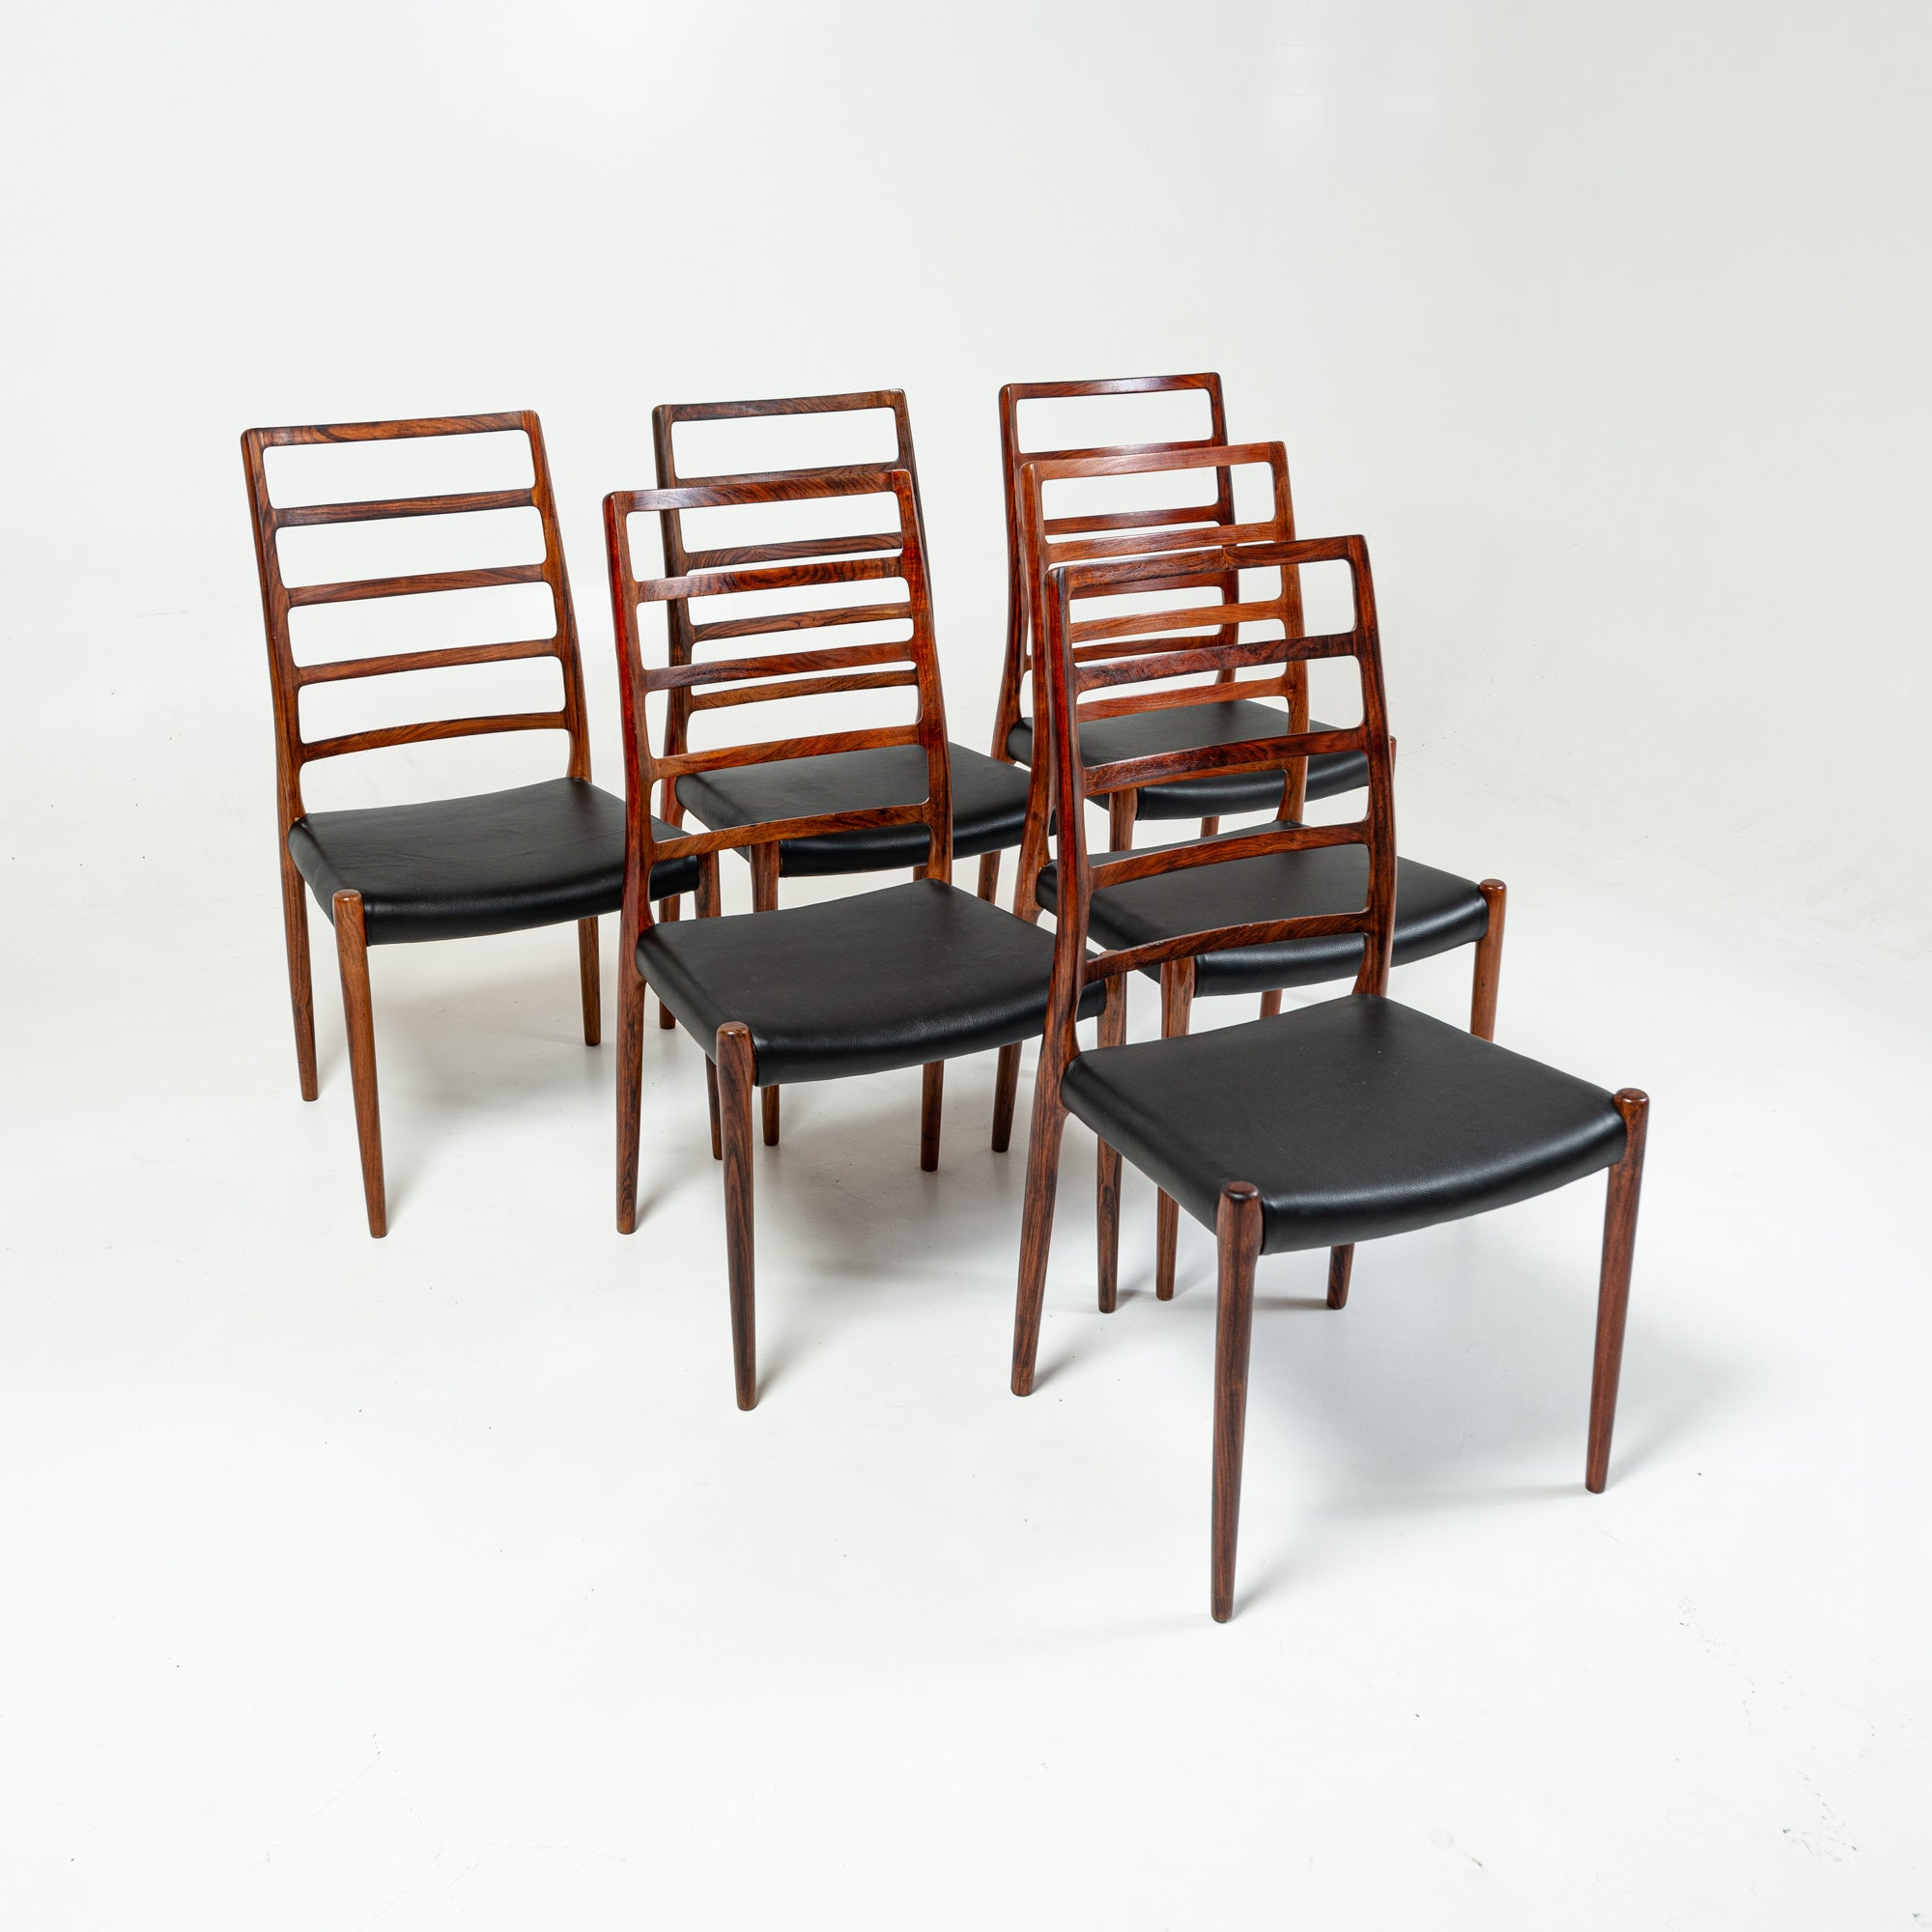 J.L. Moller set of 6 Rosewood Dining Chair Model 82